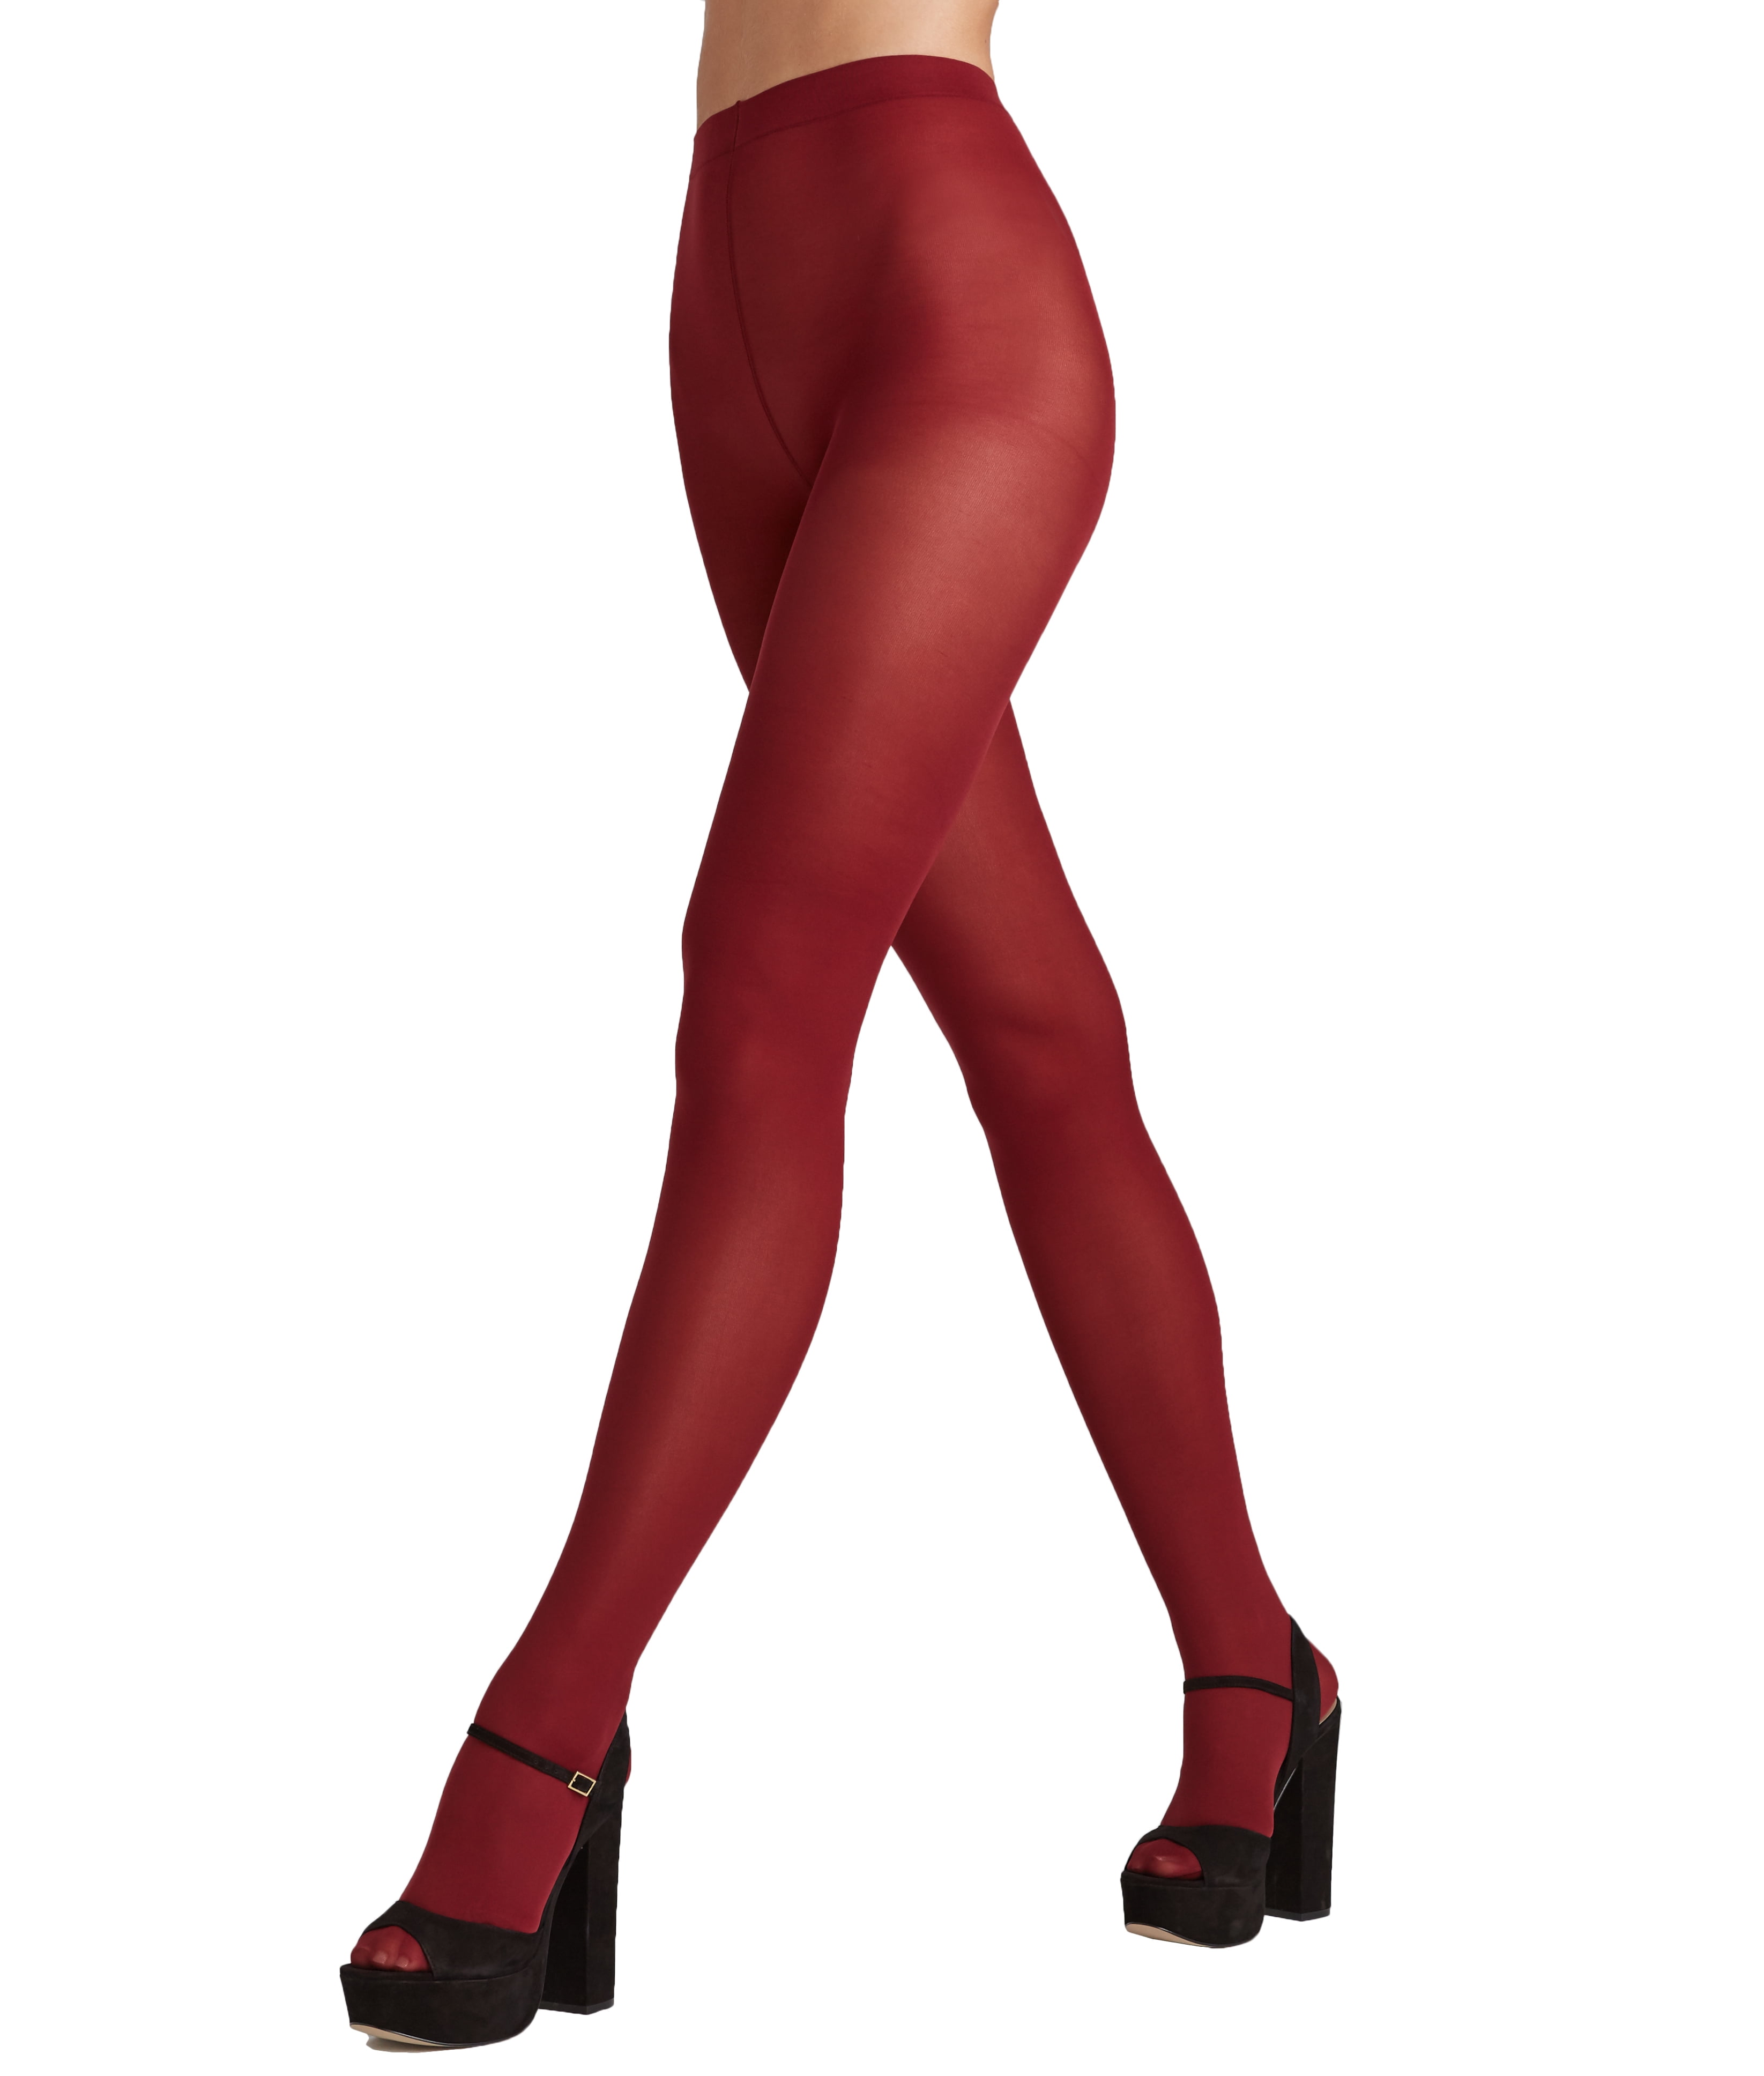 NEW Hue Opaque Tights Sizes 2 Sangria Red  FAST SHIPPING 